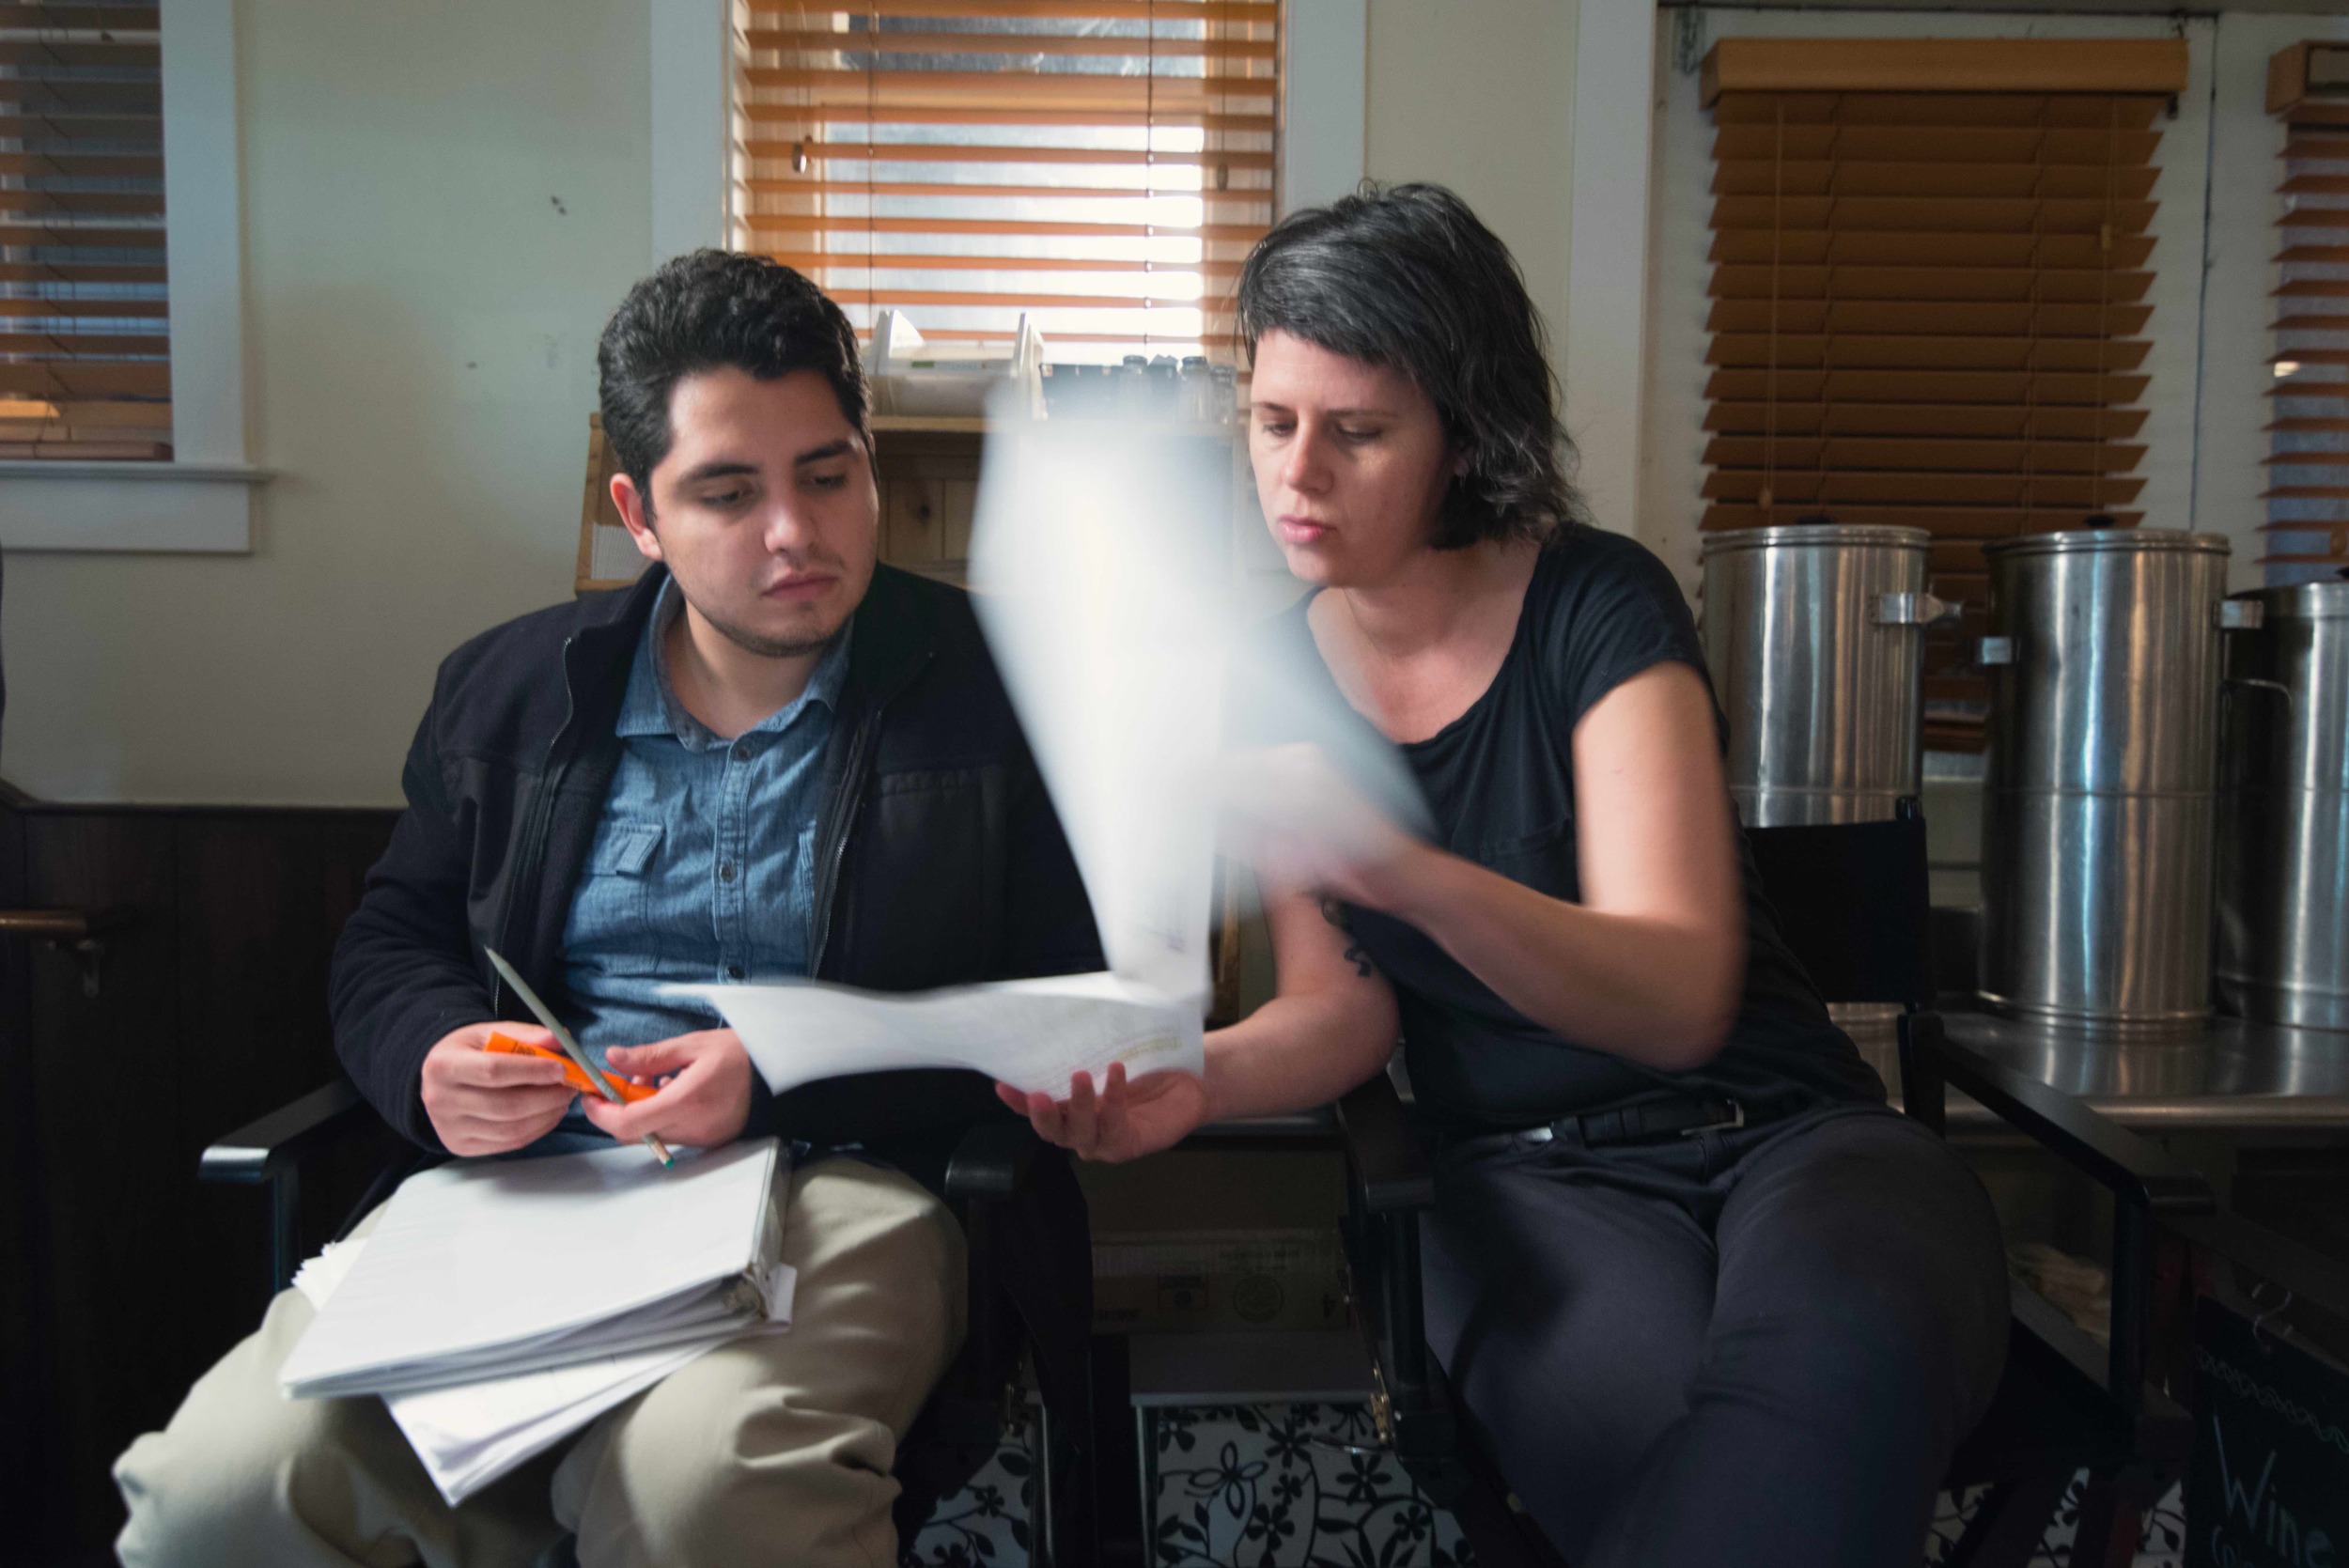  JAVA was produced with The Mason Film Lab in Film and Video Studies at George Mason University. Here Chesler works with Rodrigo Vasquez in script supervising. Image Dixie D. Vereen. 